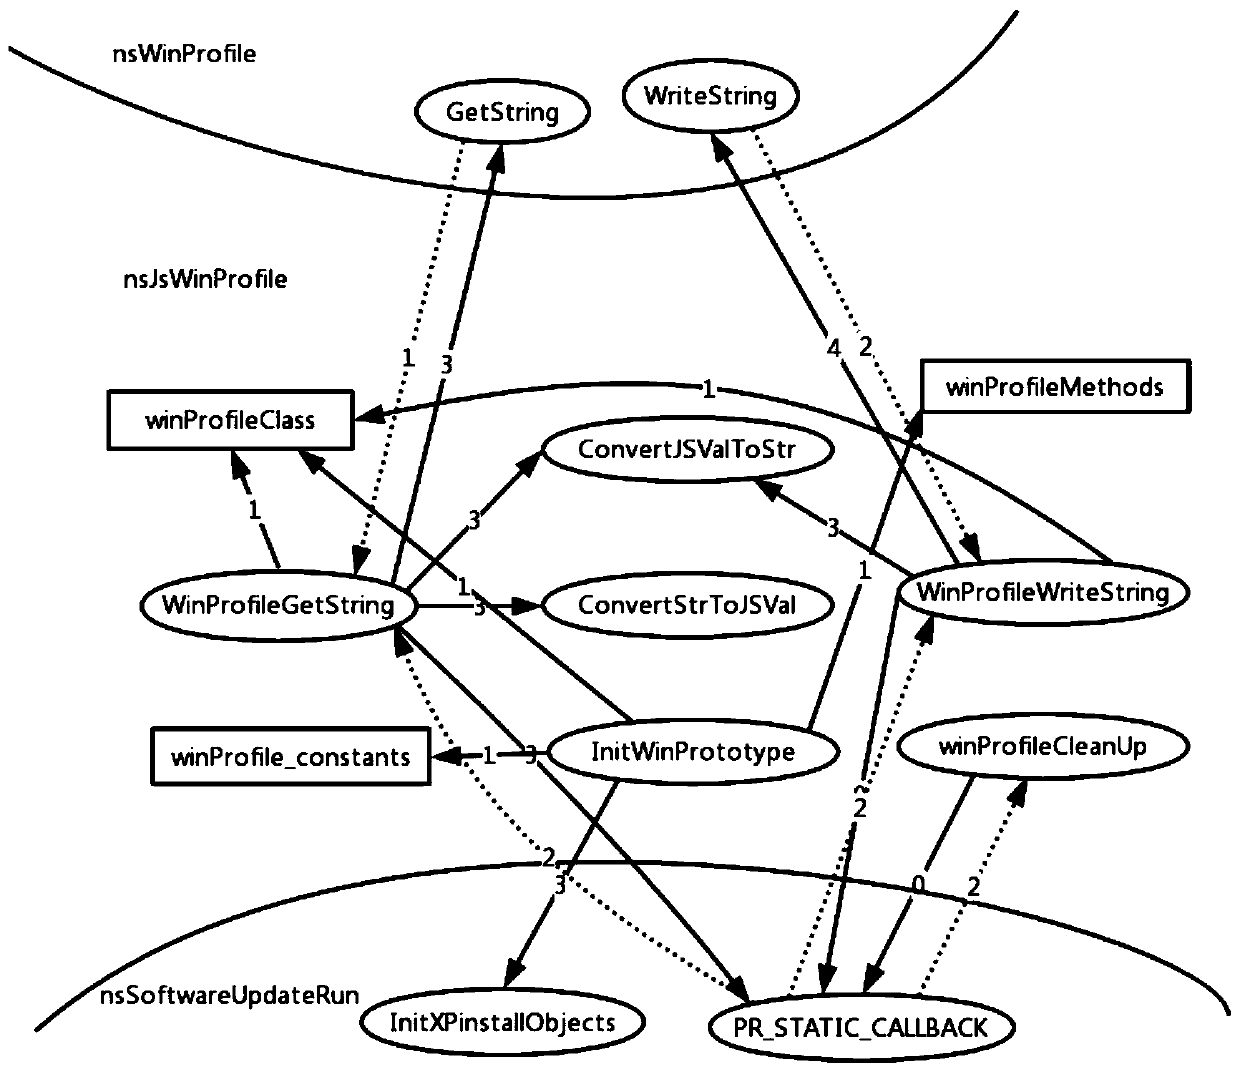 A Software Security Vulnerability Prediction Method Based on Component Dependency Graph